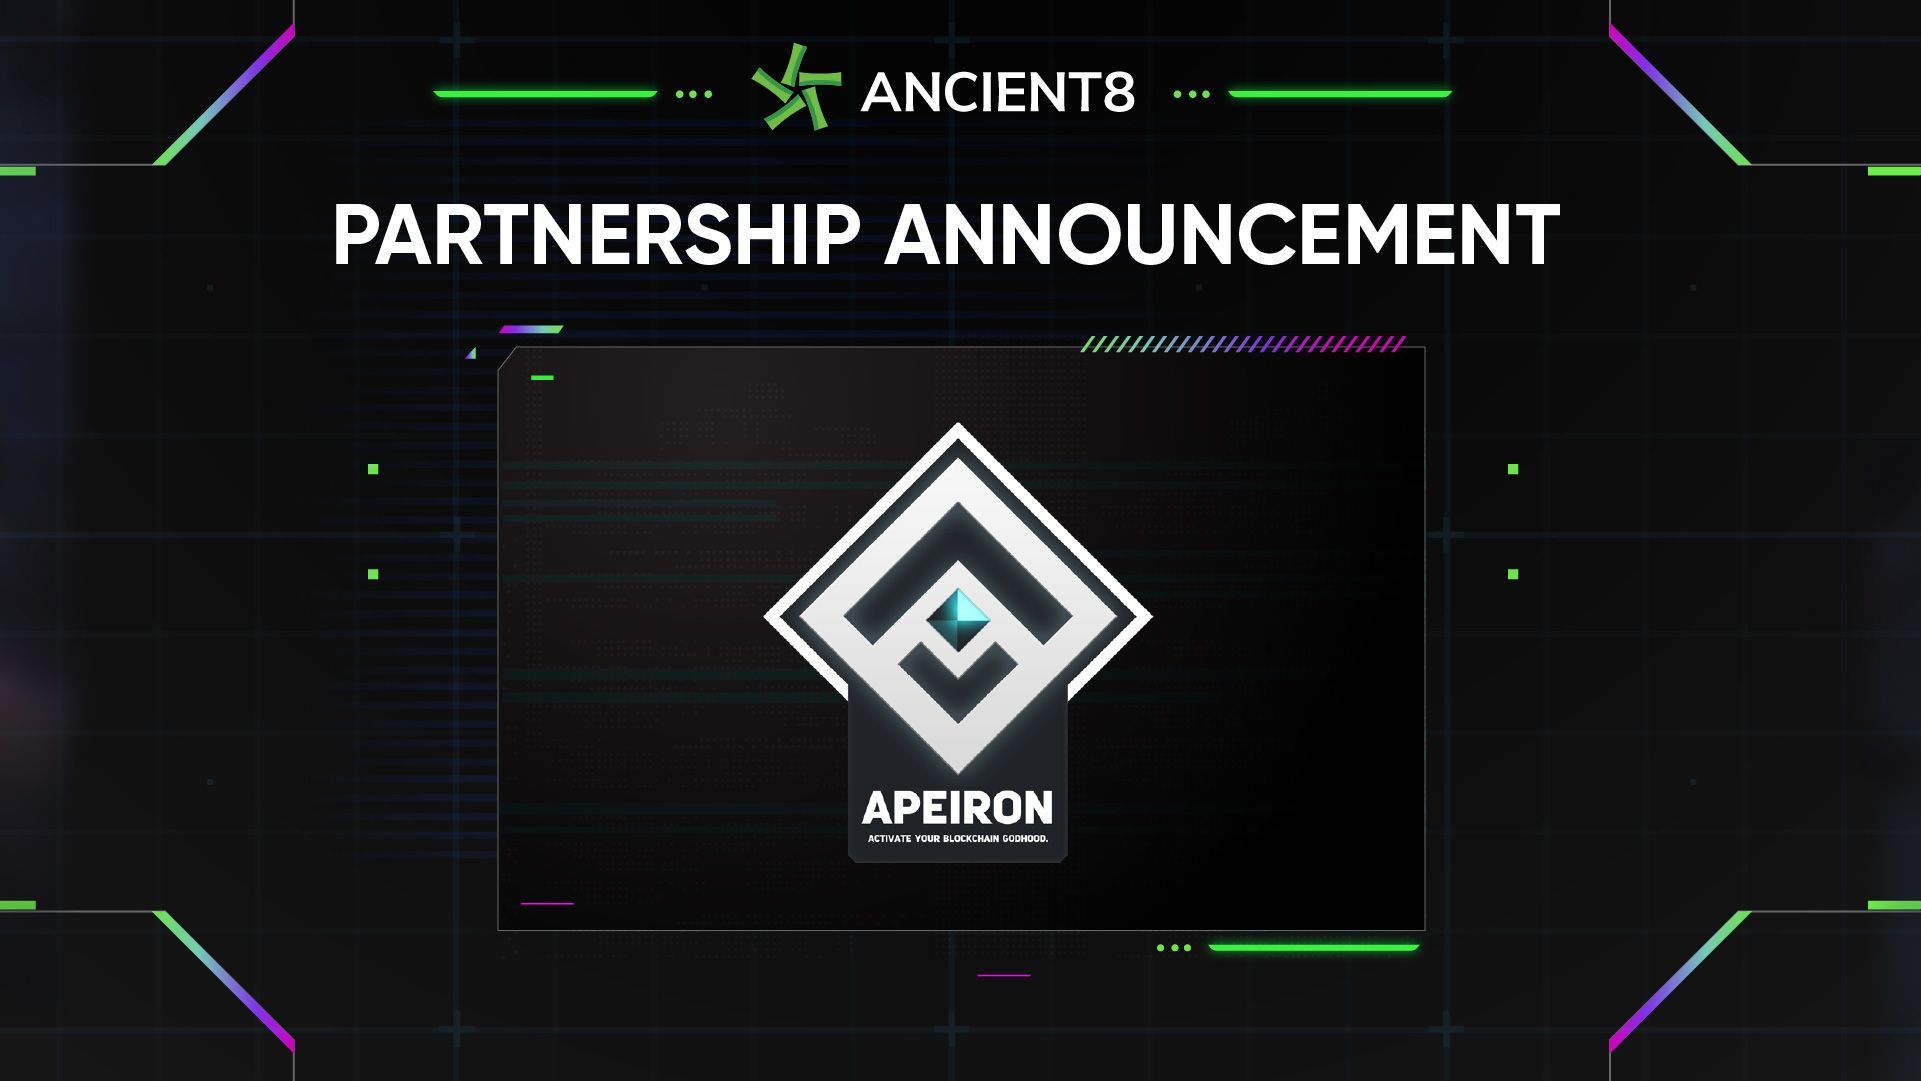 Ancient8 partners with Apeiron, prepare your ascension into the Godiverse